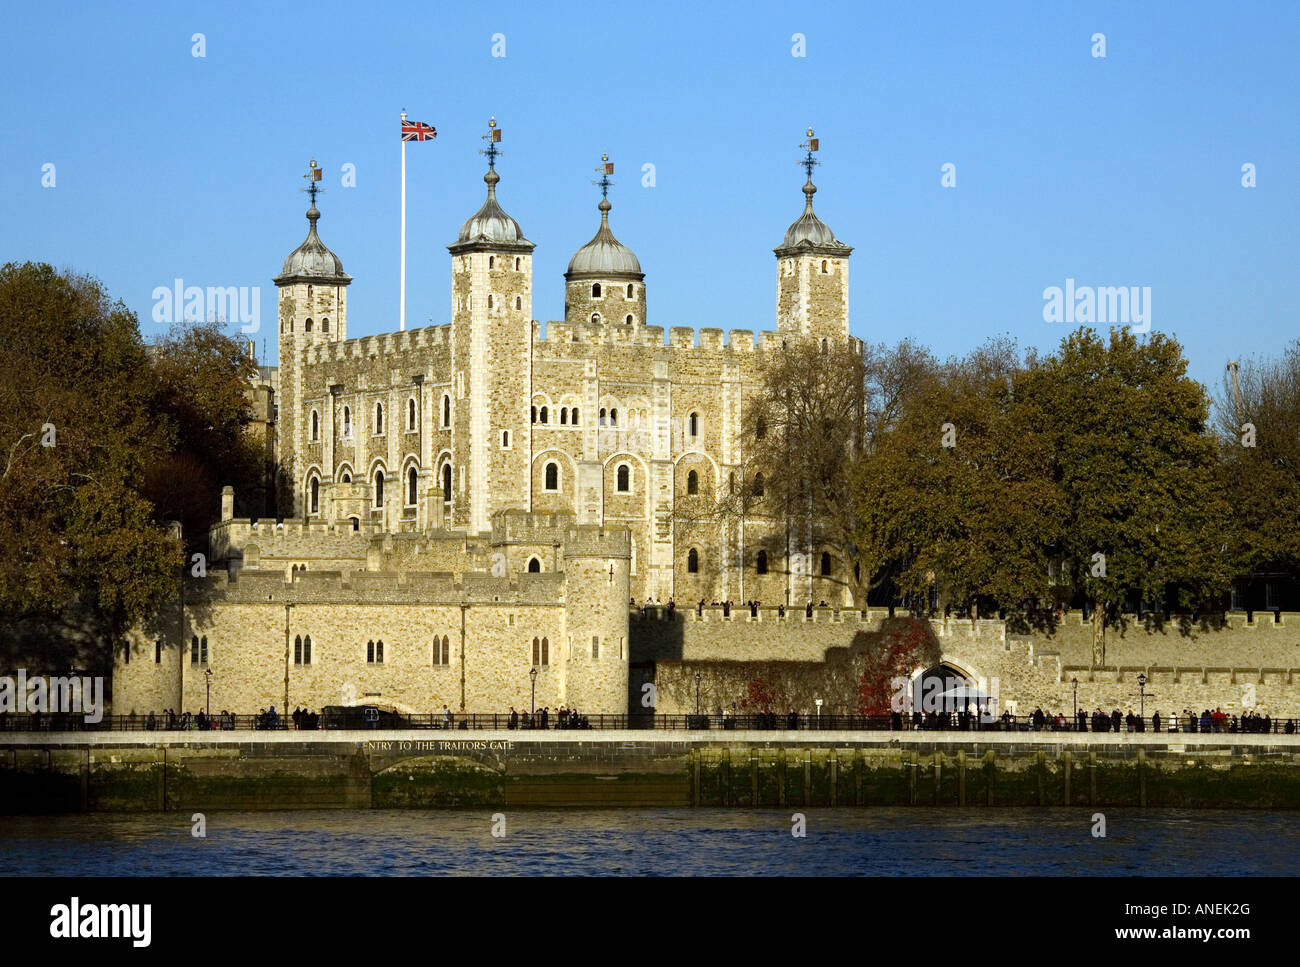 Tower of London in London, England. Stock Photo